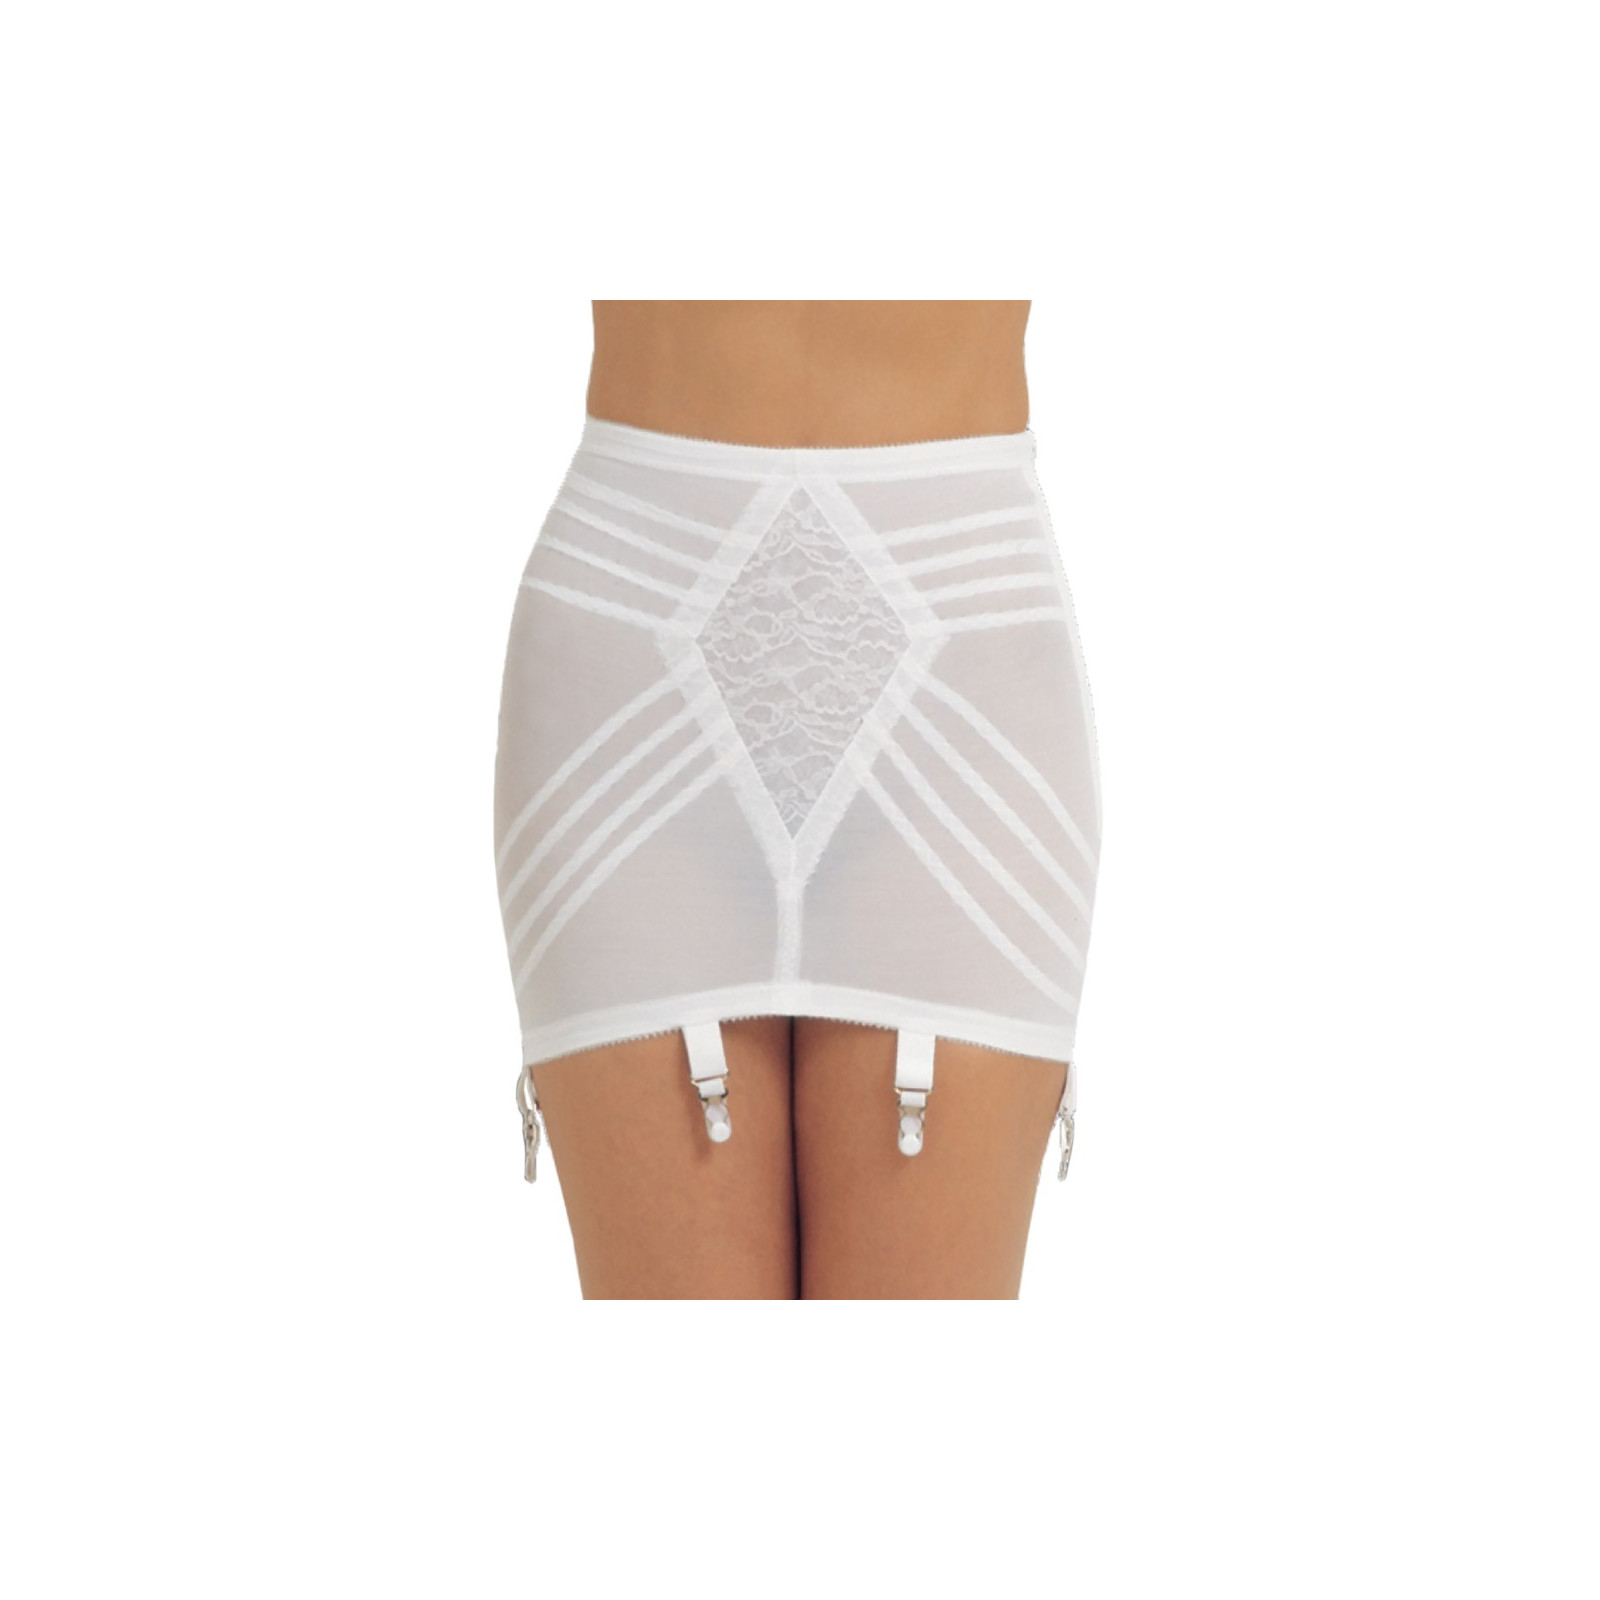 Style 8355 | Open Bottom Girdle Light to Moderate Shaping